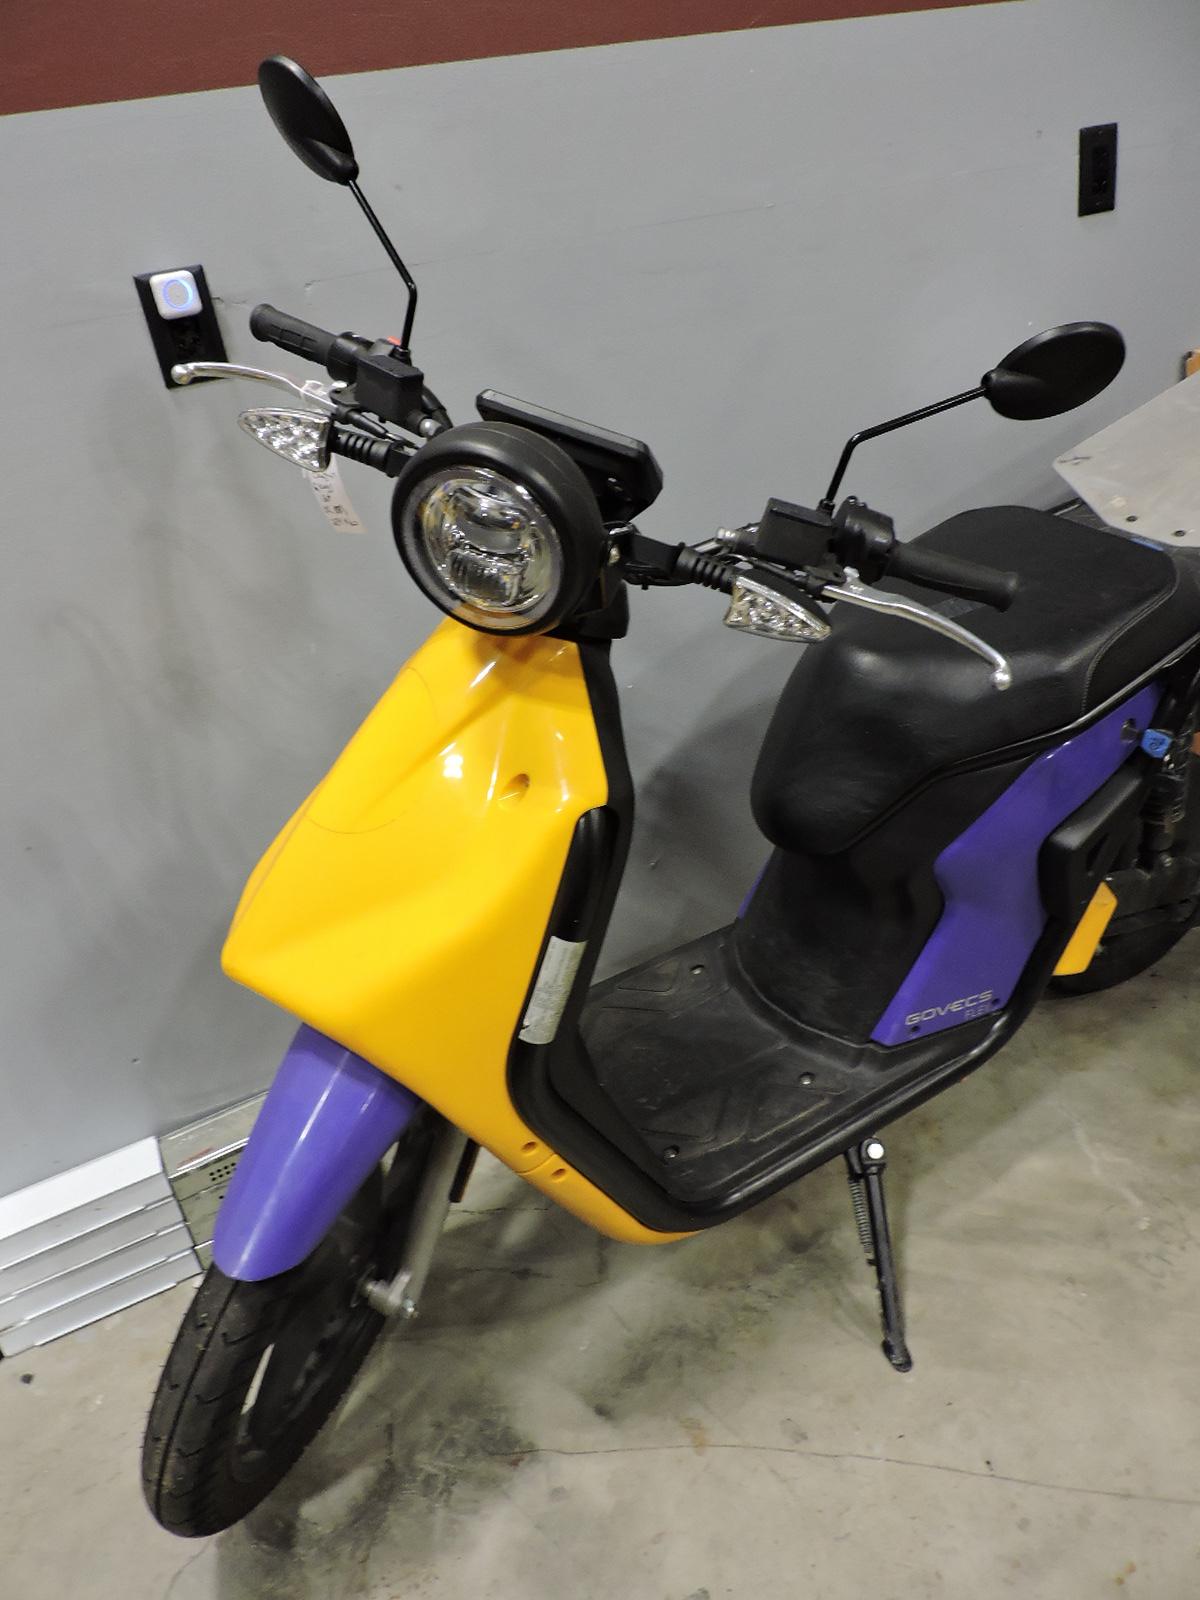 GOVECS FLEX 2.0 - Electric Scooter - Moped / 2541.0 Mi / 2 Keys, Battery & Charger - Runs Well